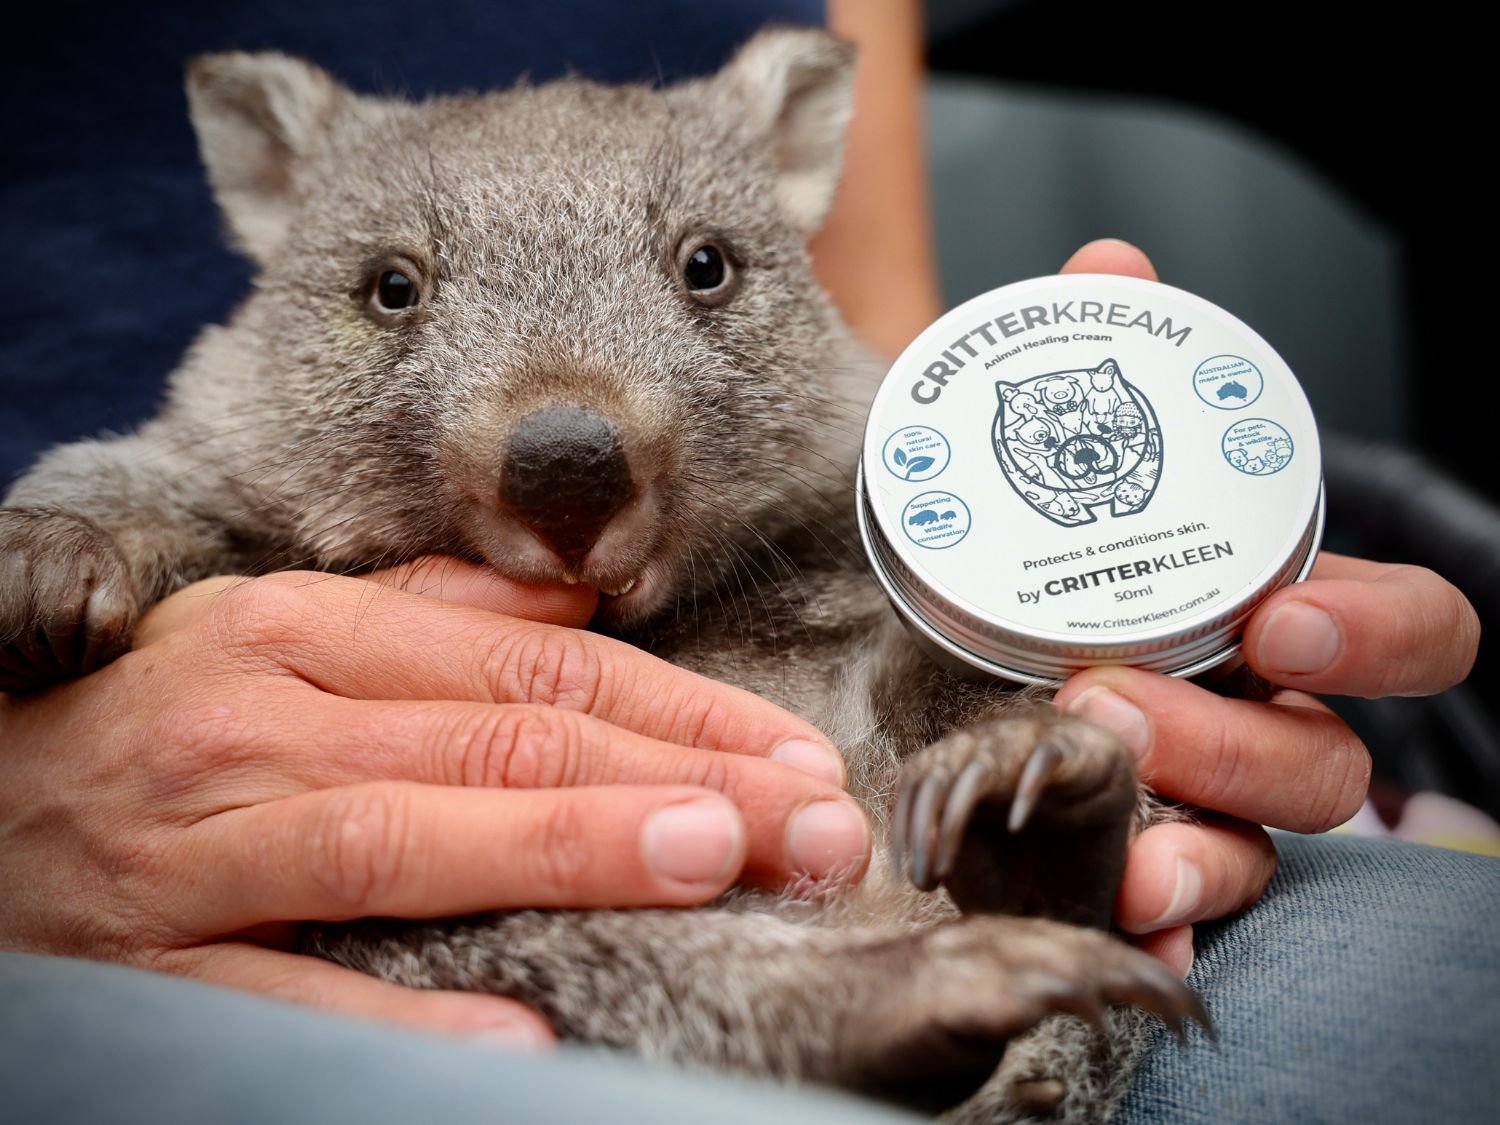 A baby wombat being treated with CritterKream